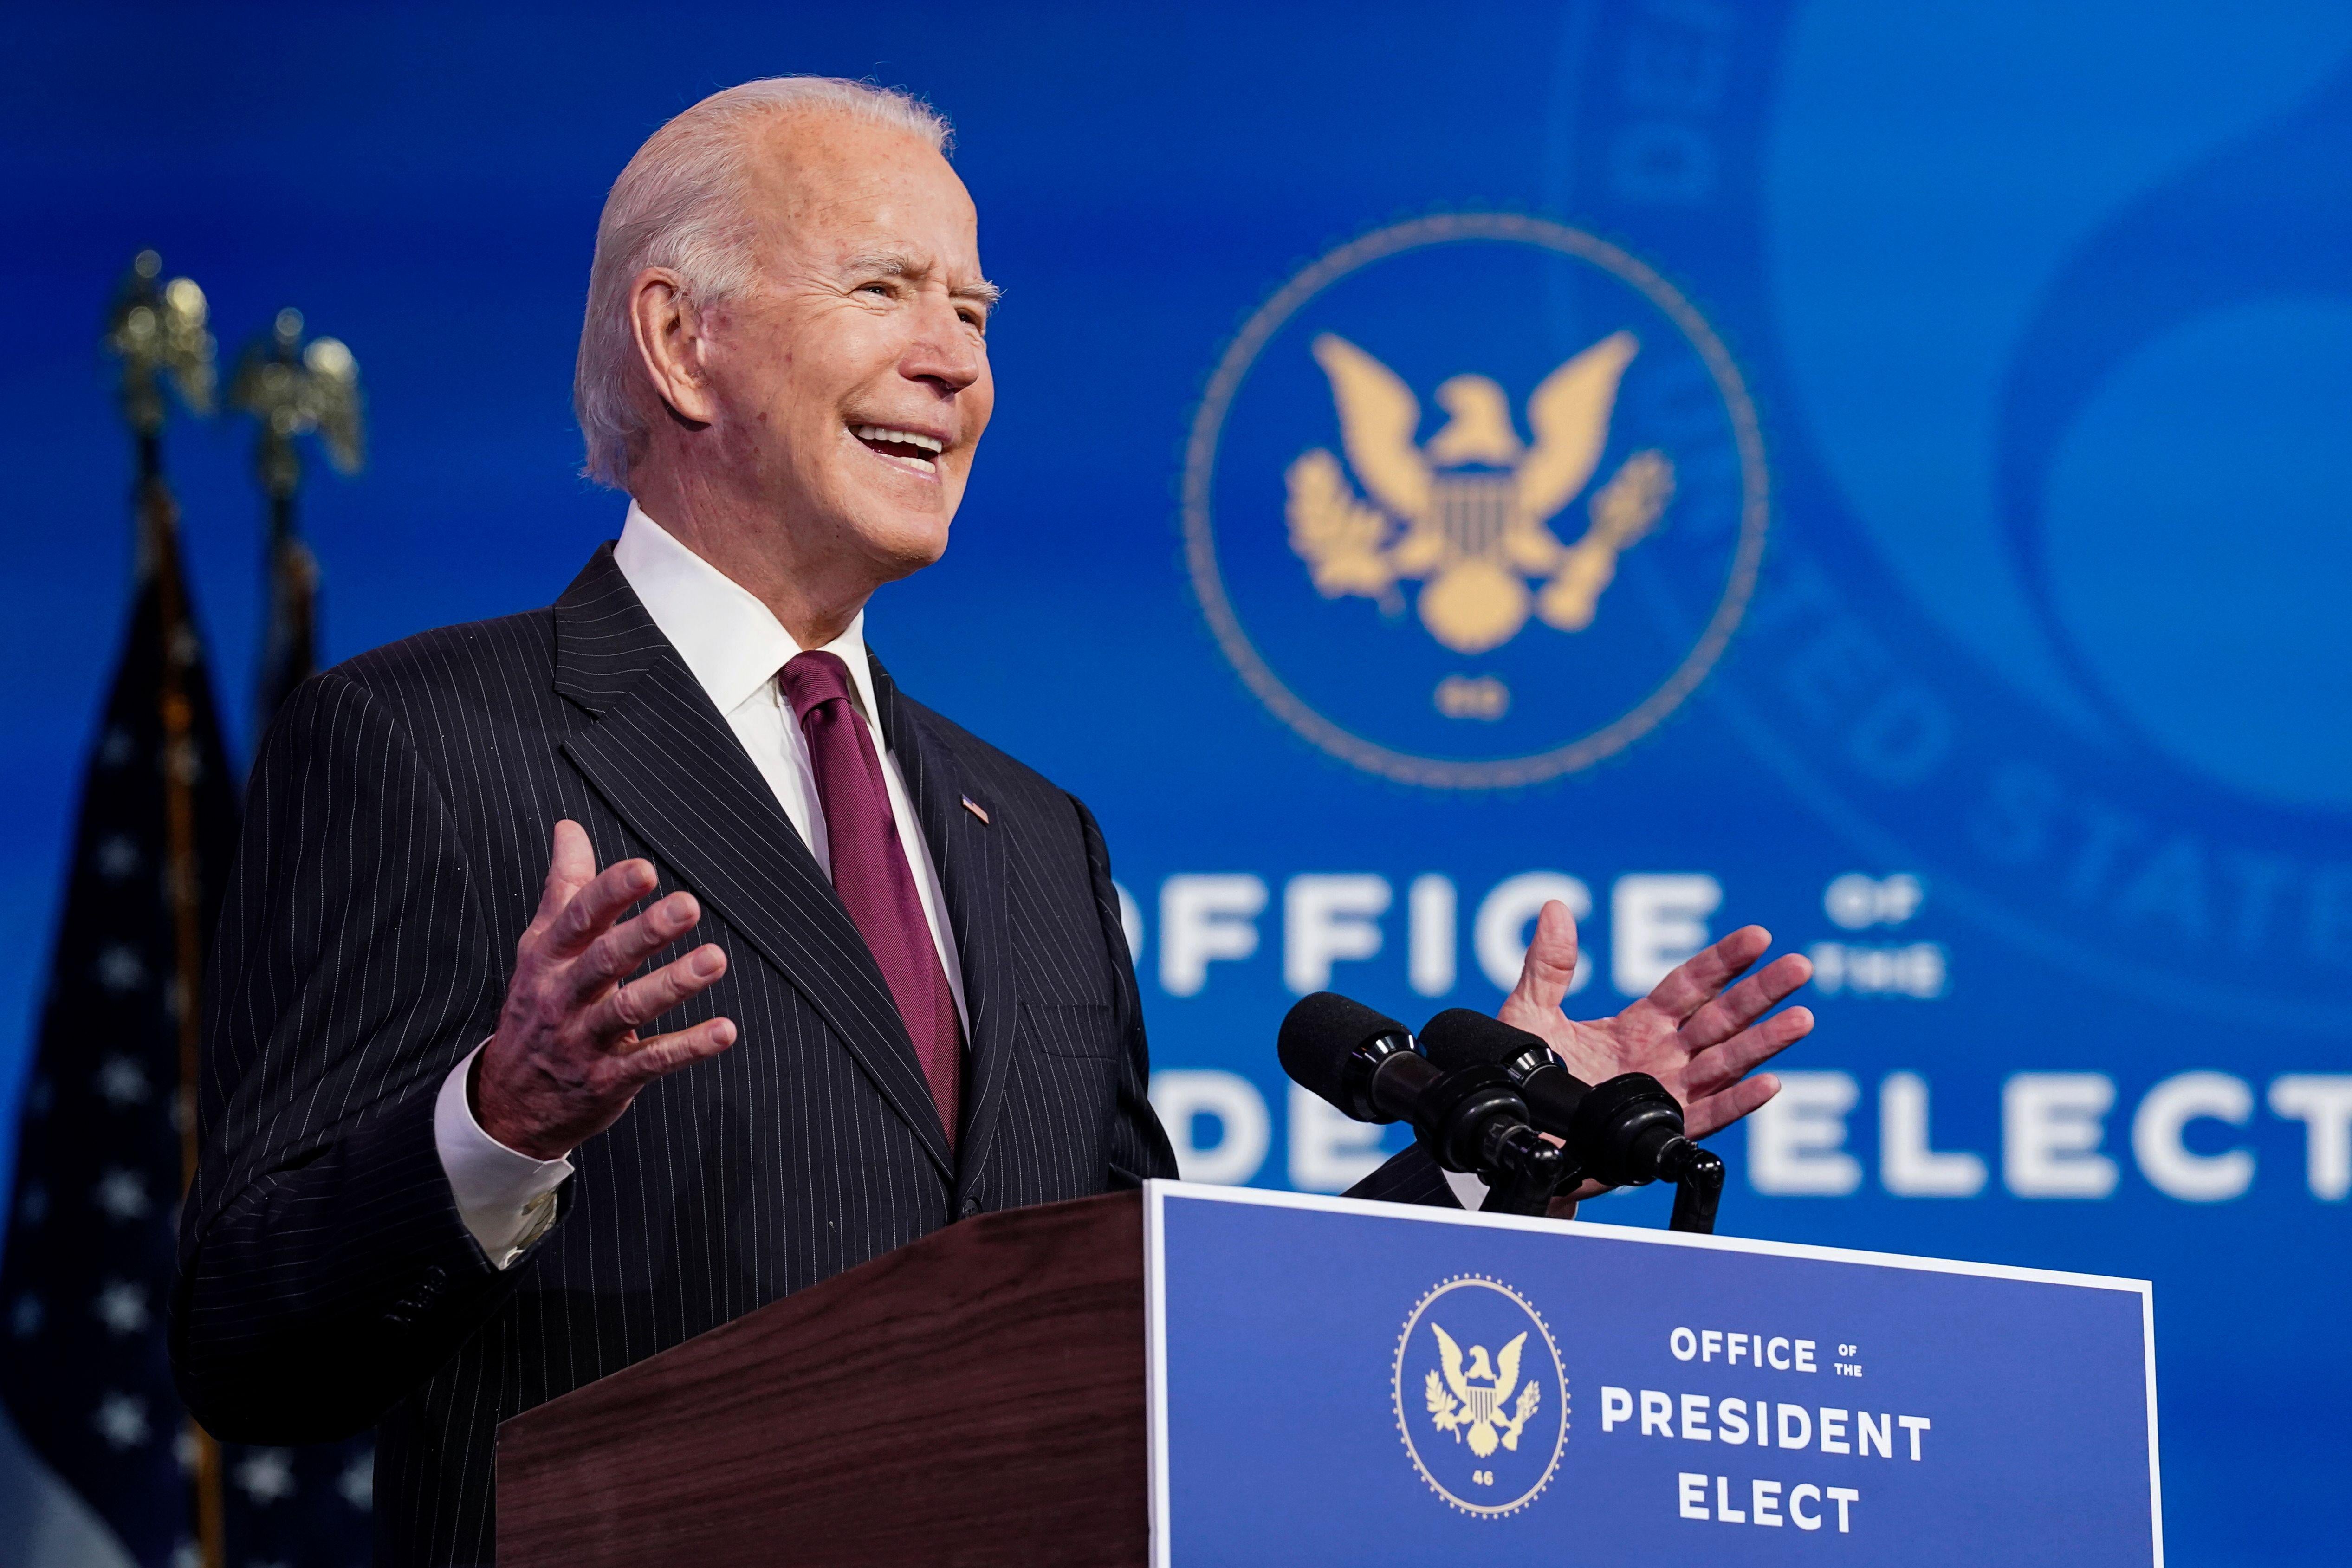 Biden speaks and gestures at a podium marked Office of the President Elect